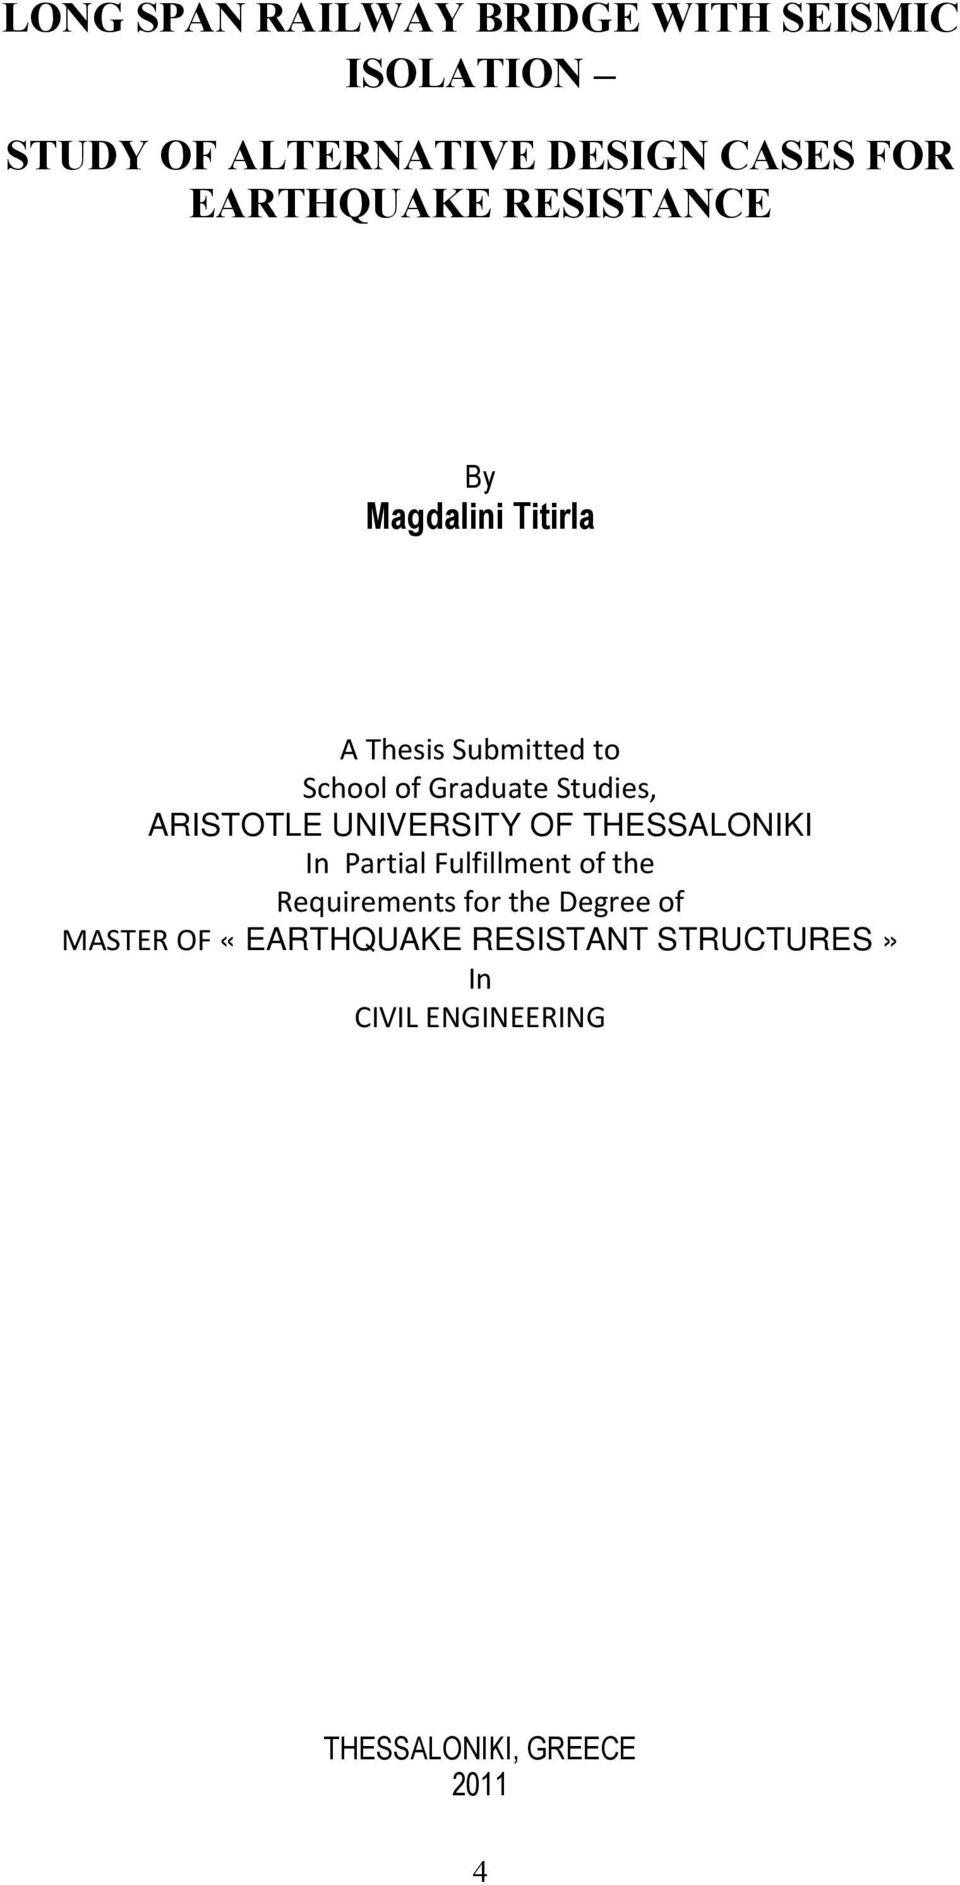 ARISTOTLE UNIVERSITY OF THESSALONIKI In Partial Fulfillment of the Requirements for the